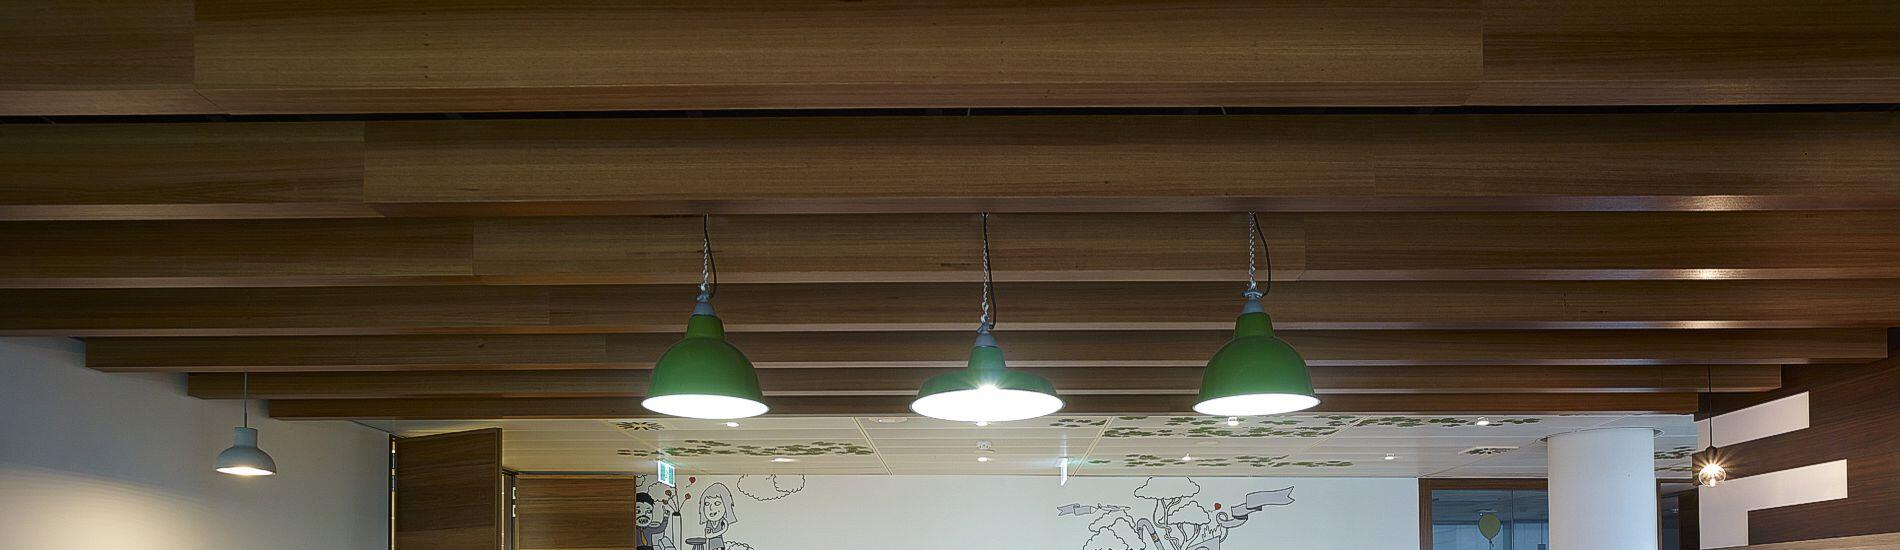 MAXI BEAM Lightweight Beams Used For Decorative Ceilings In Award Winning Workplace